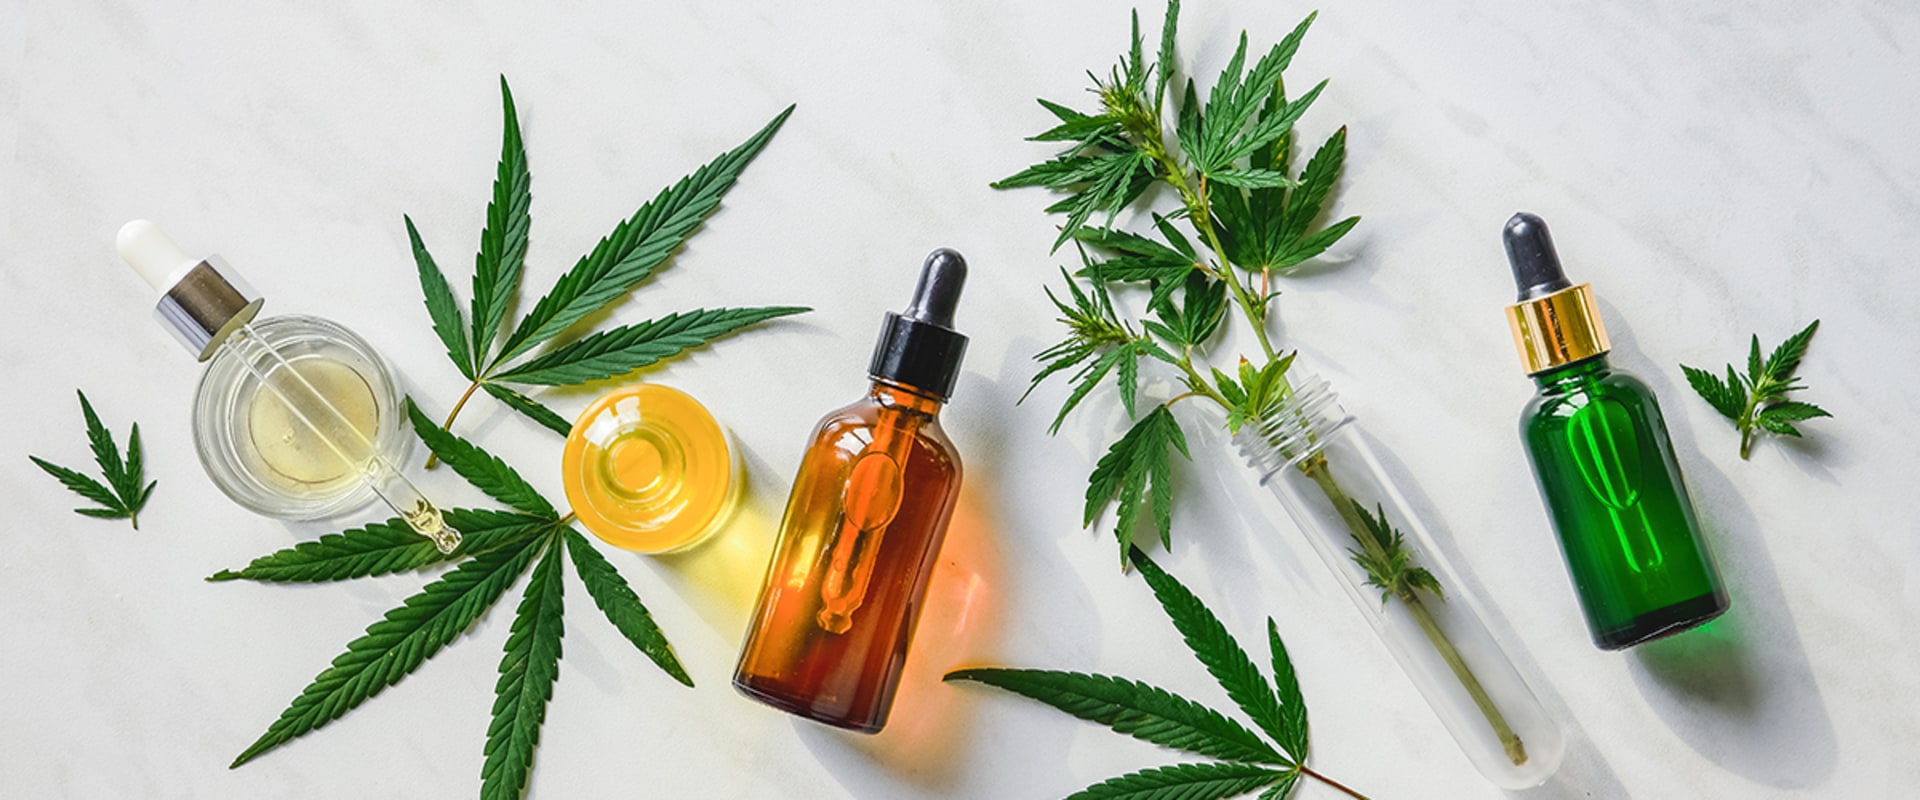 Does cbd work for pain right away?